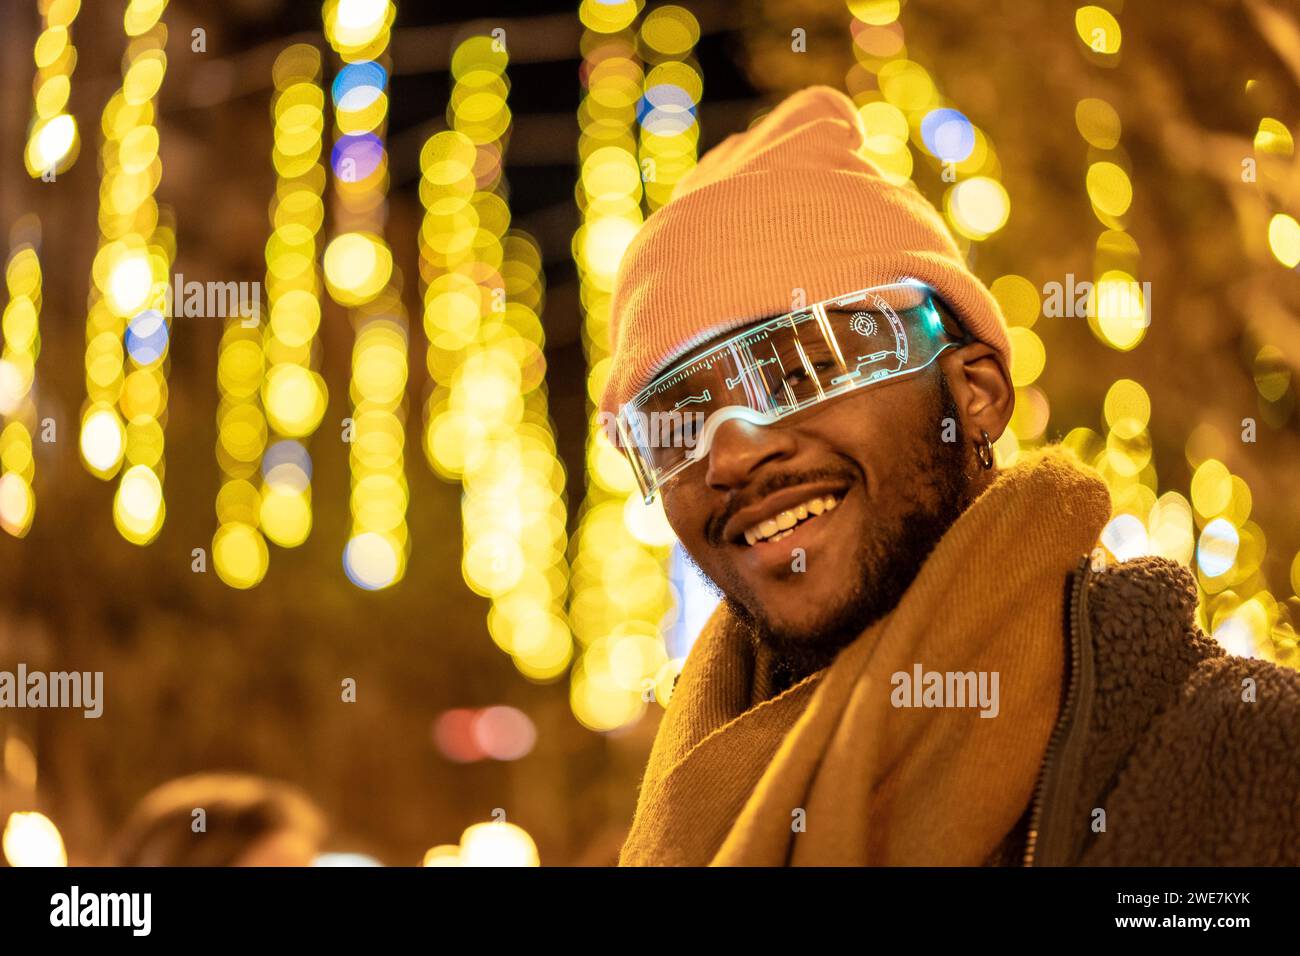 Cool african man wearing smart glasses in the city at night with lights decorating the streets Stock Photo